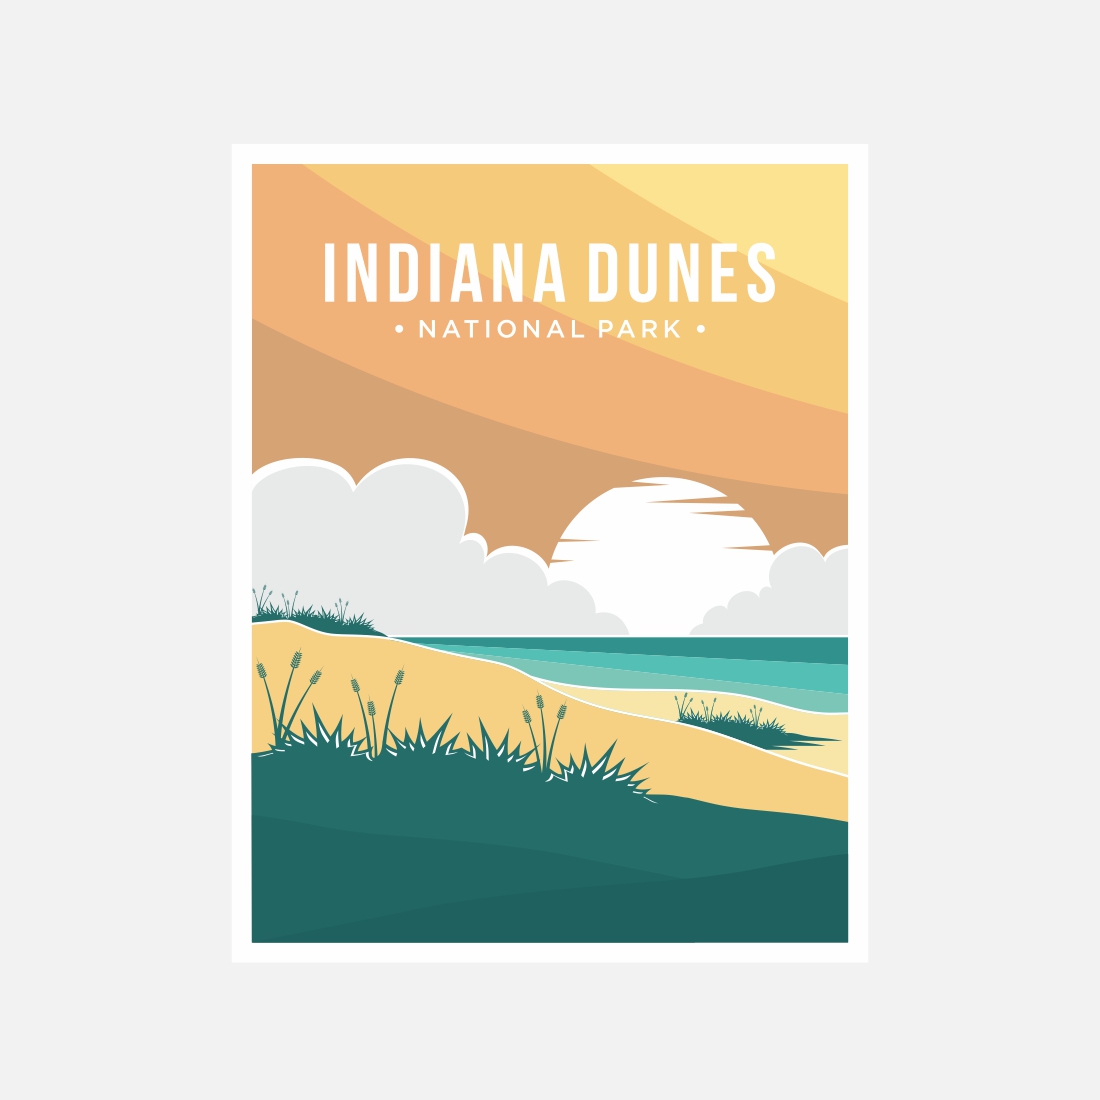 Indiana Dunes national park poster vector illustration design – Only $8 preview image.